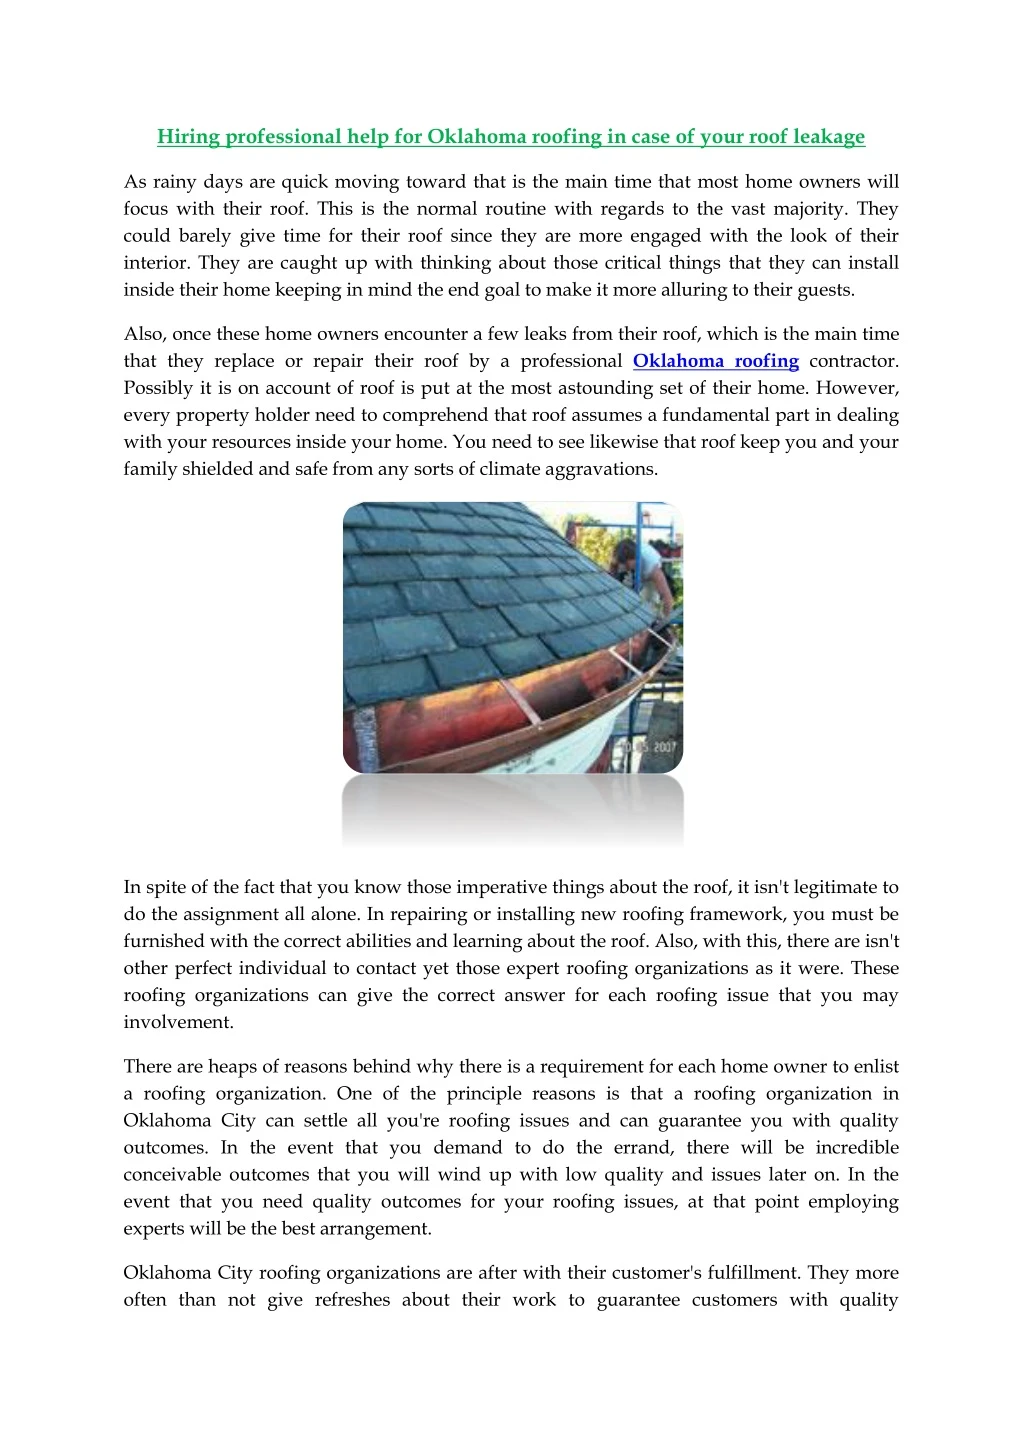 hiring professional help for oklahoma roofing